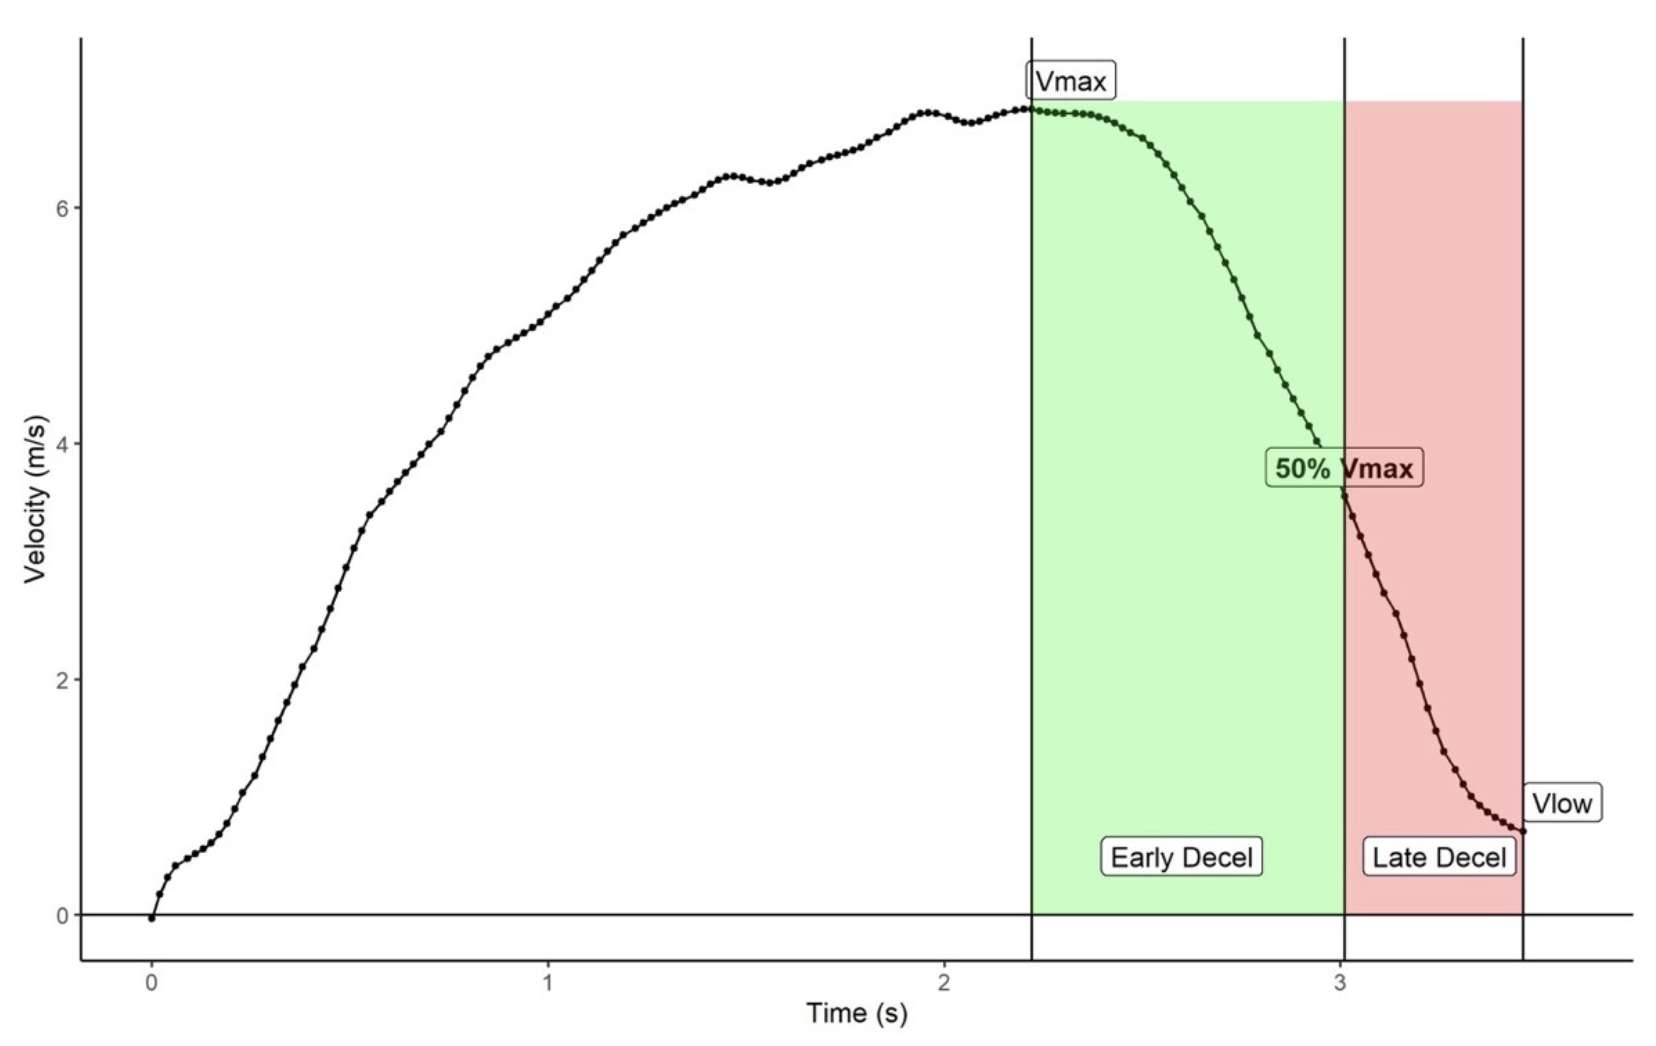 A graph showing the average temperature Description automatically generated with medium confidence.